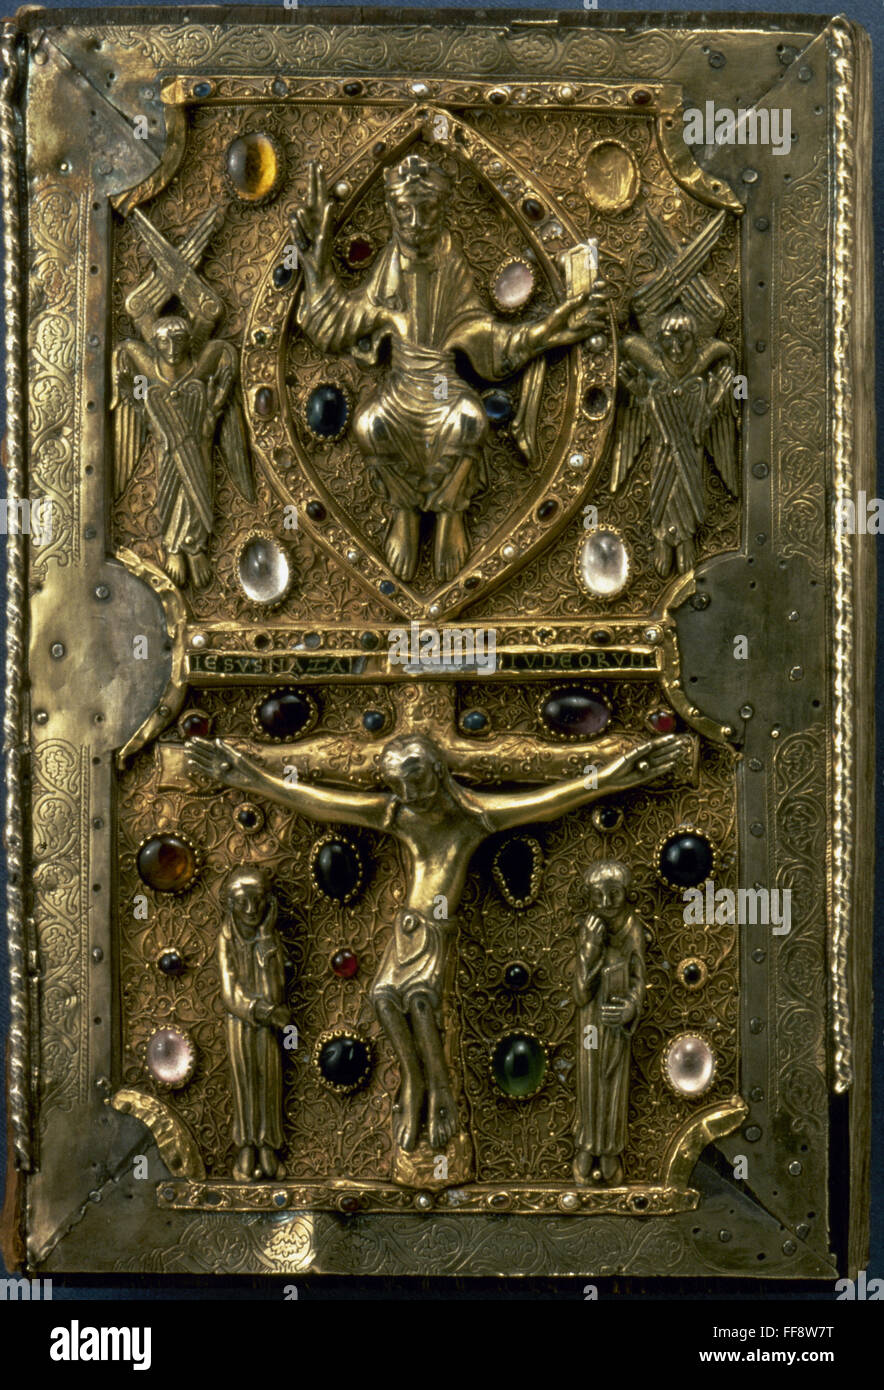 CHRIST IN MAJESTY. /nChrist crucified. Binding of 'English Book of Gospels,' c1150. Stock Photo